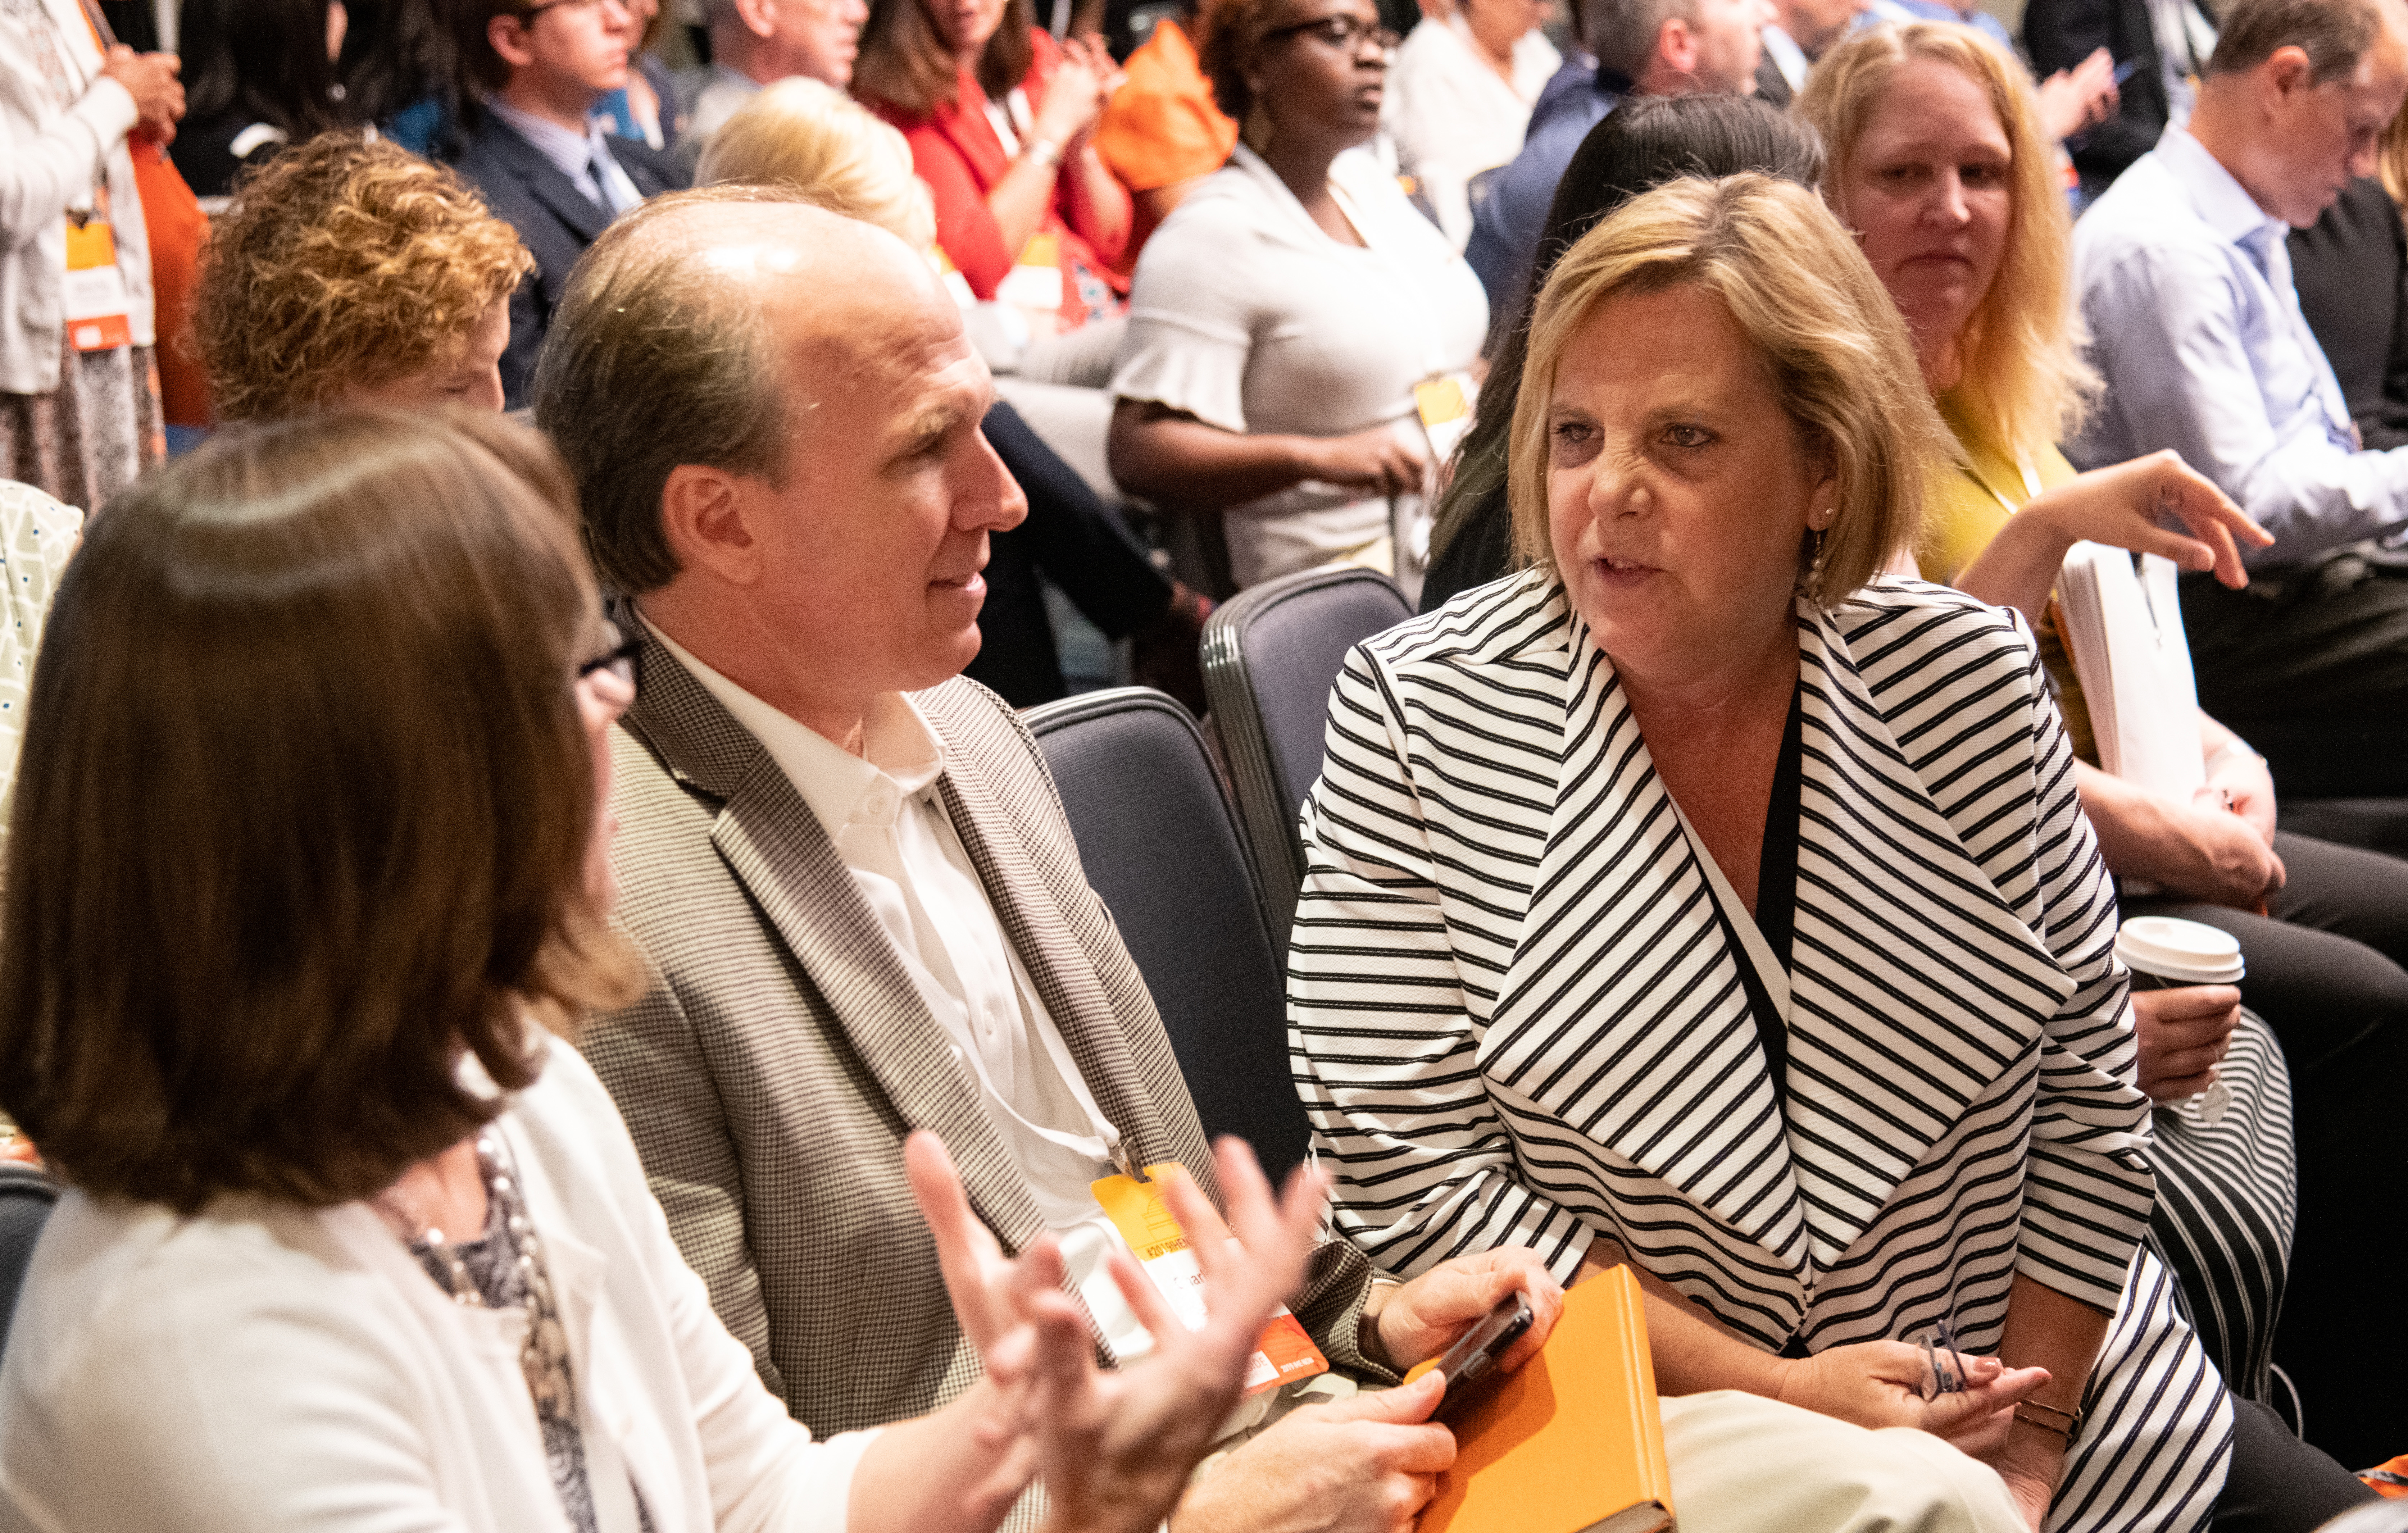 Attendees at the conference held in Baltimore from July 8-10, 2019, discuss the future of public higher education. 